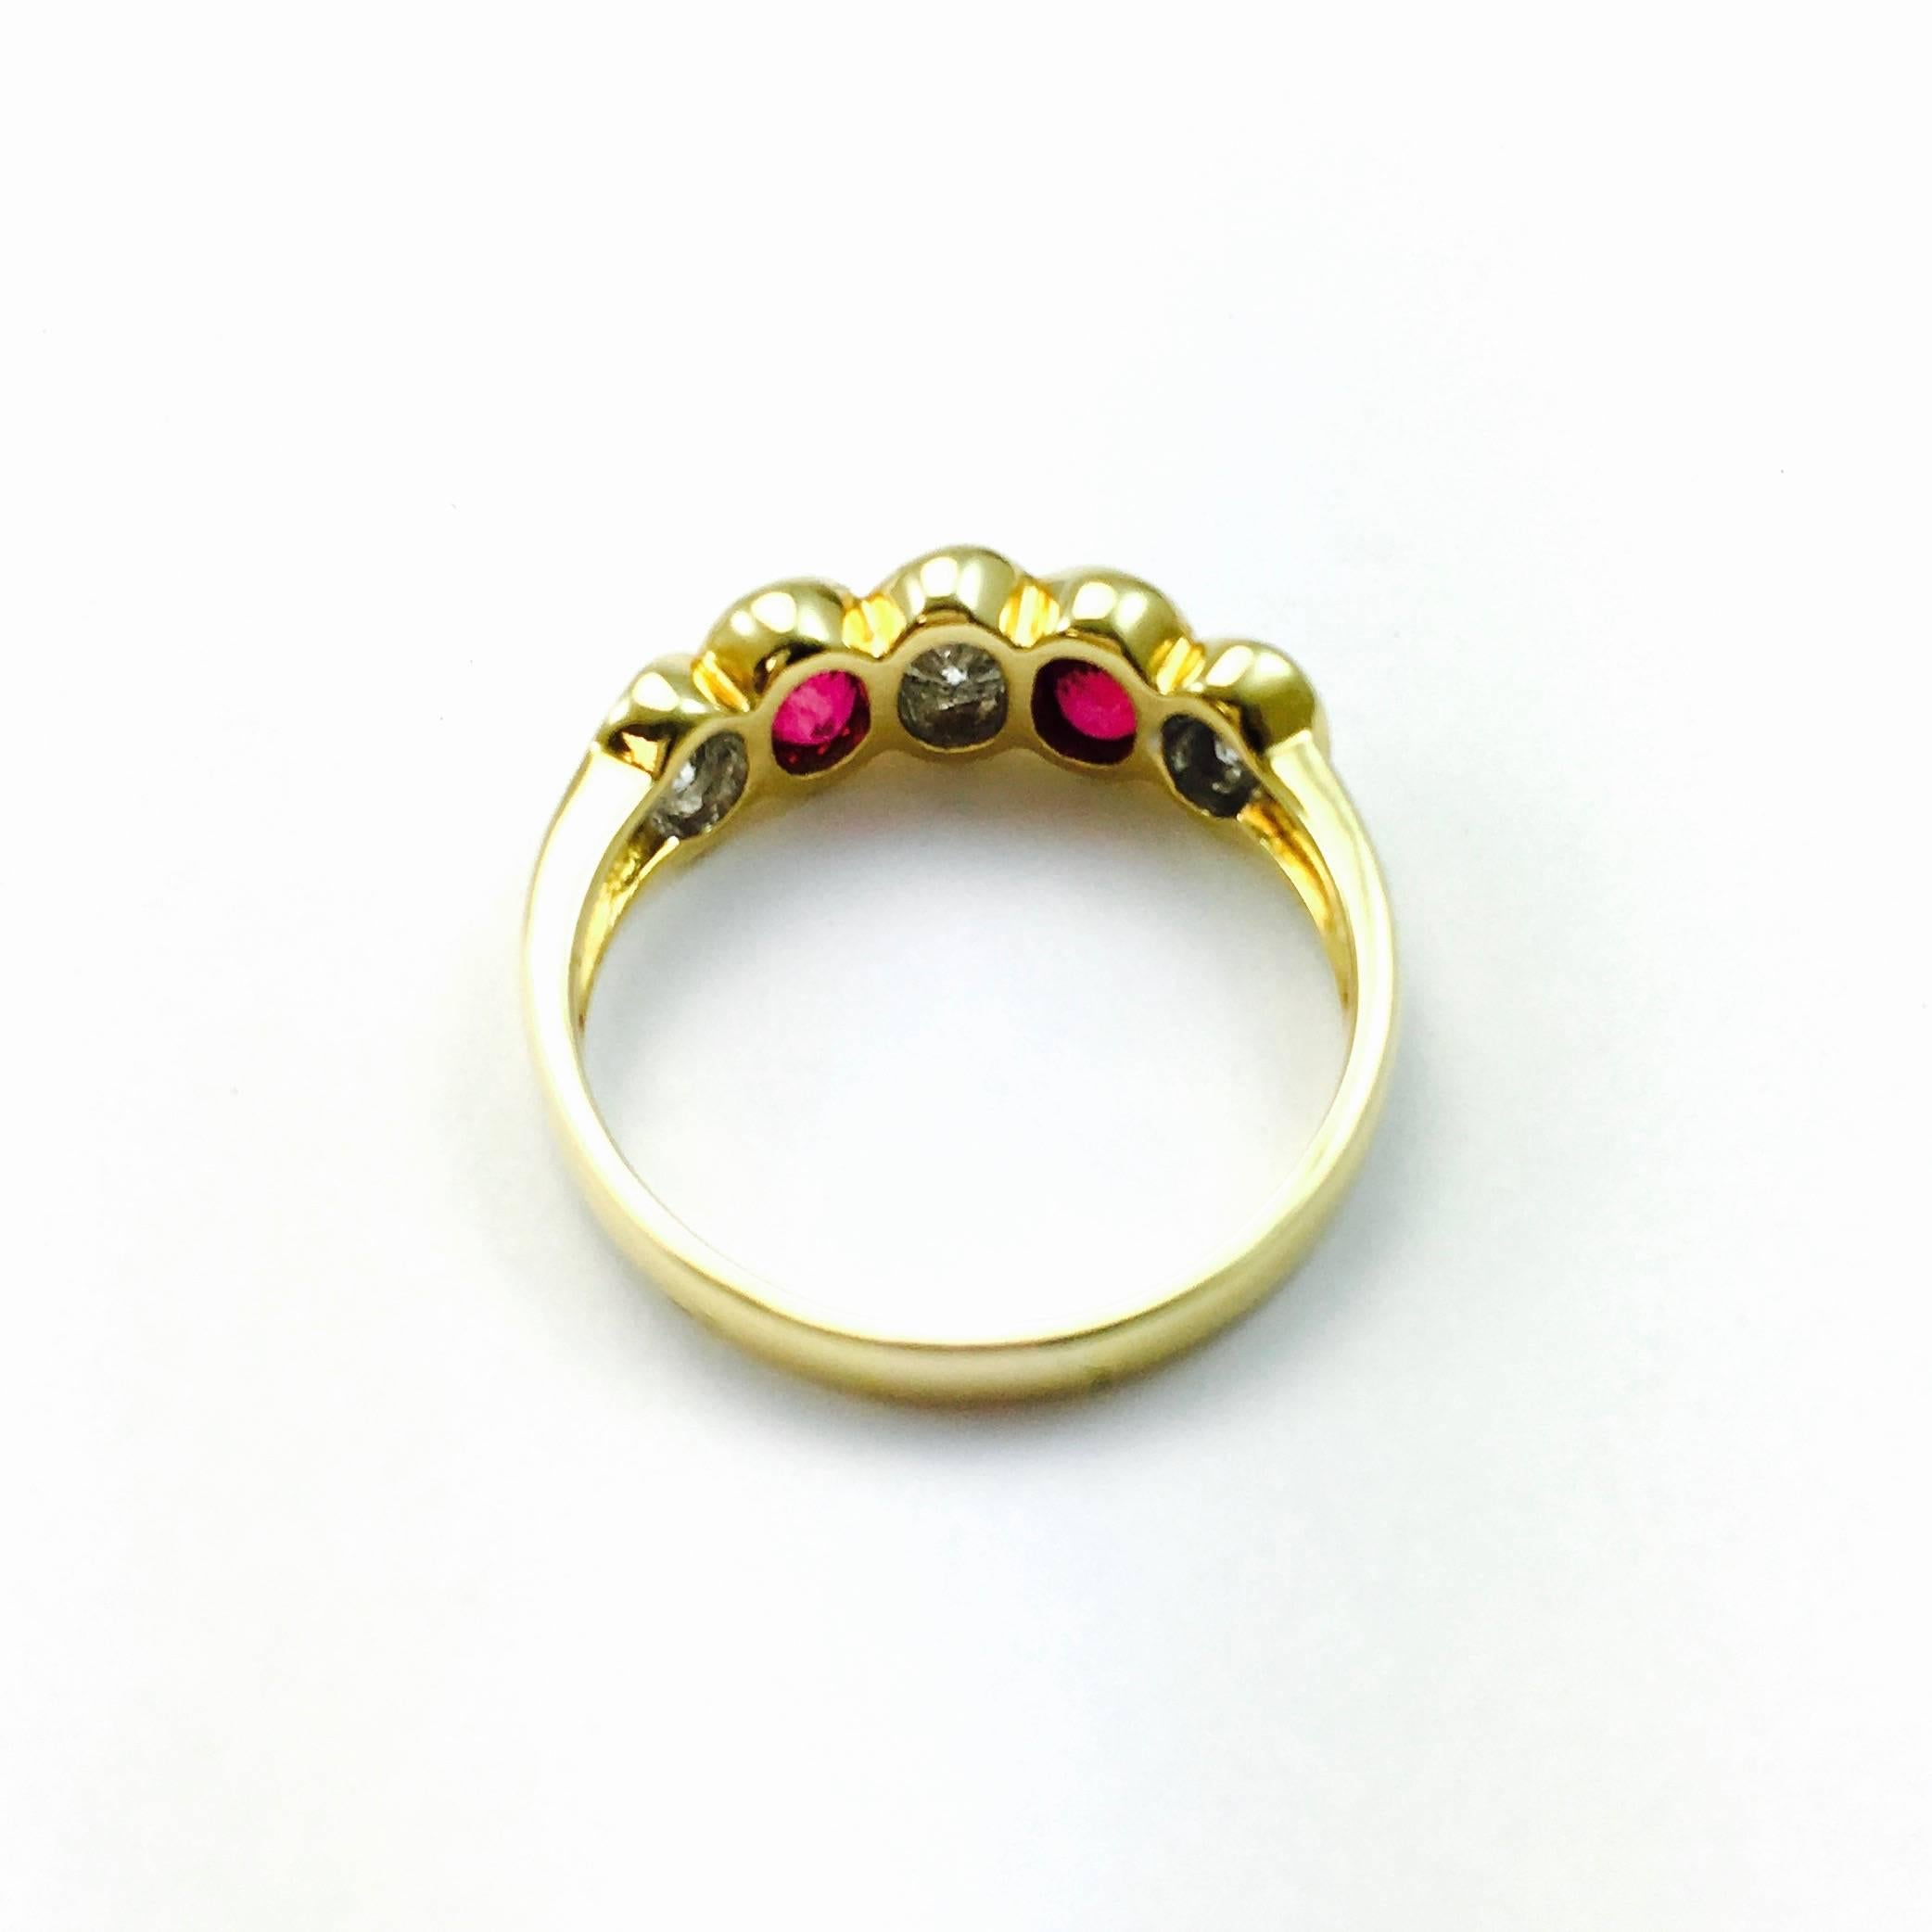 Simple but elegant five stone band from Damiani in 18K yellow Gold. Featuring gorgeous alternating  oval bezel set diamonds and rubies. 
3 diamonds: approximate total weight of 0.70 ct. Color: F-G, Clarity: VS
2 rubies: approximate total weight of